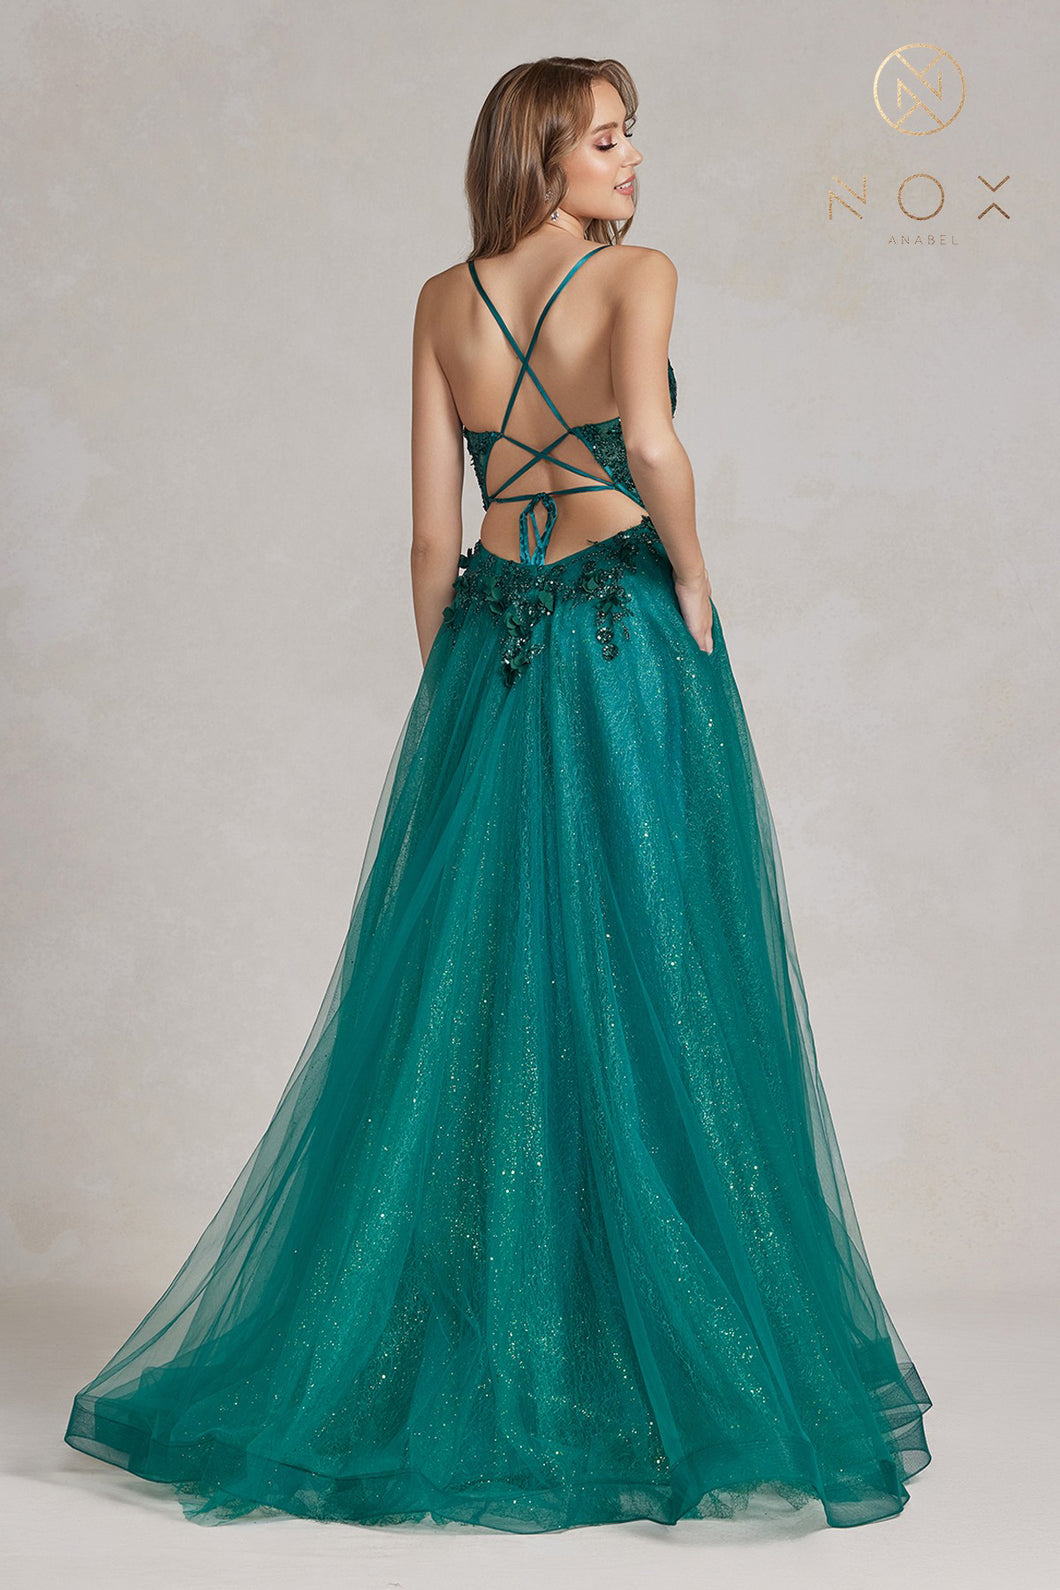 N C1113 - Shimmer Tulle A-Line Prom Gown with Sheer Glitter 3D Floral Bodice Lace Up Corset Back Leg Slit & Pockets PROM GOWN Nox 00 EMERALD 